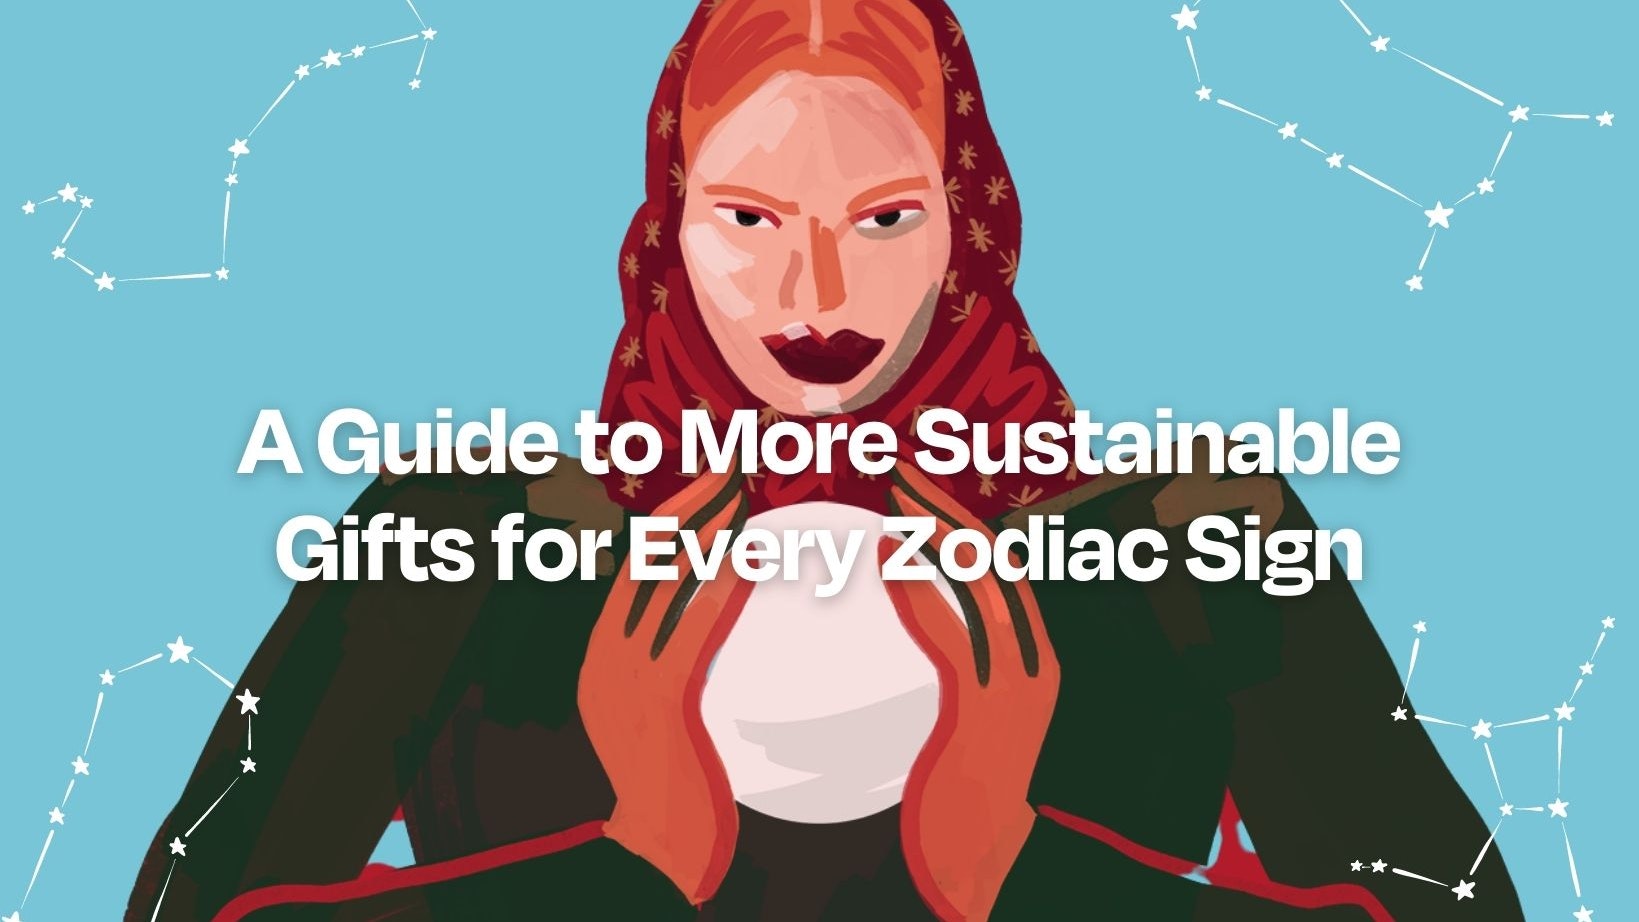 A guide to more sustainable gifts for every zodiac sign